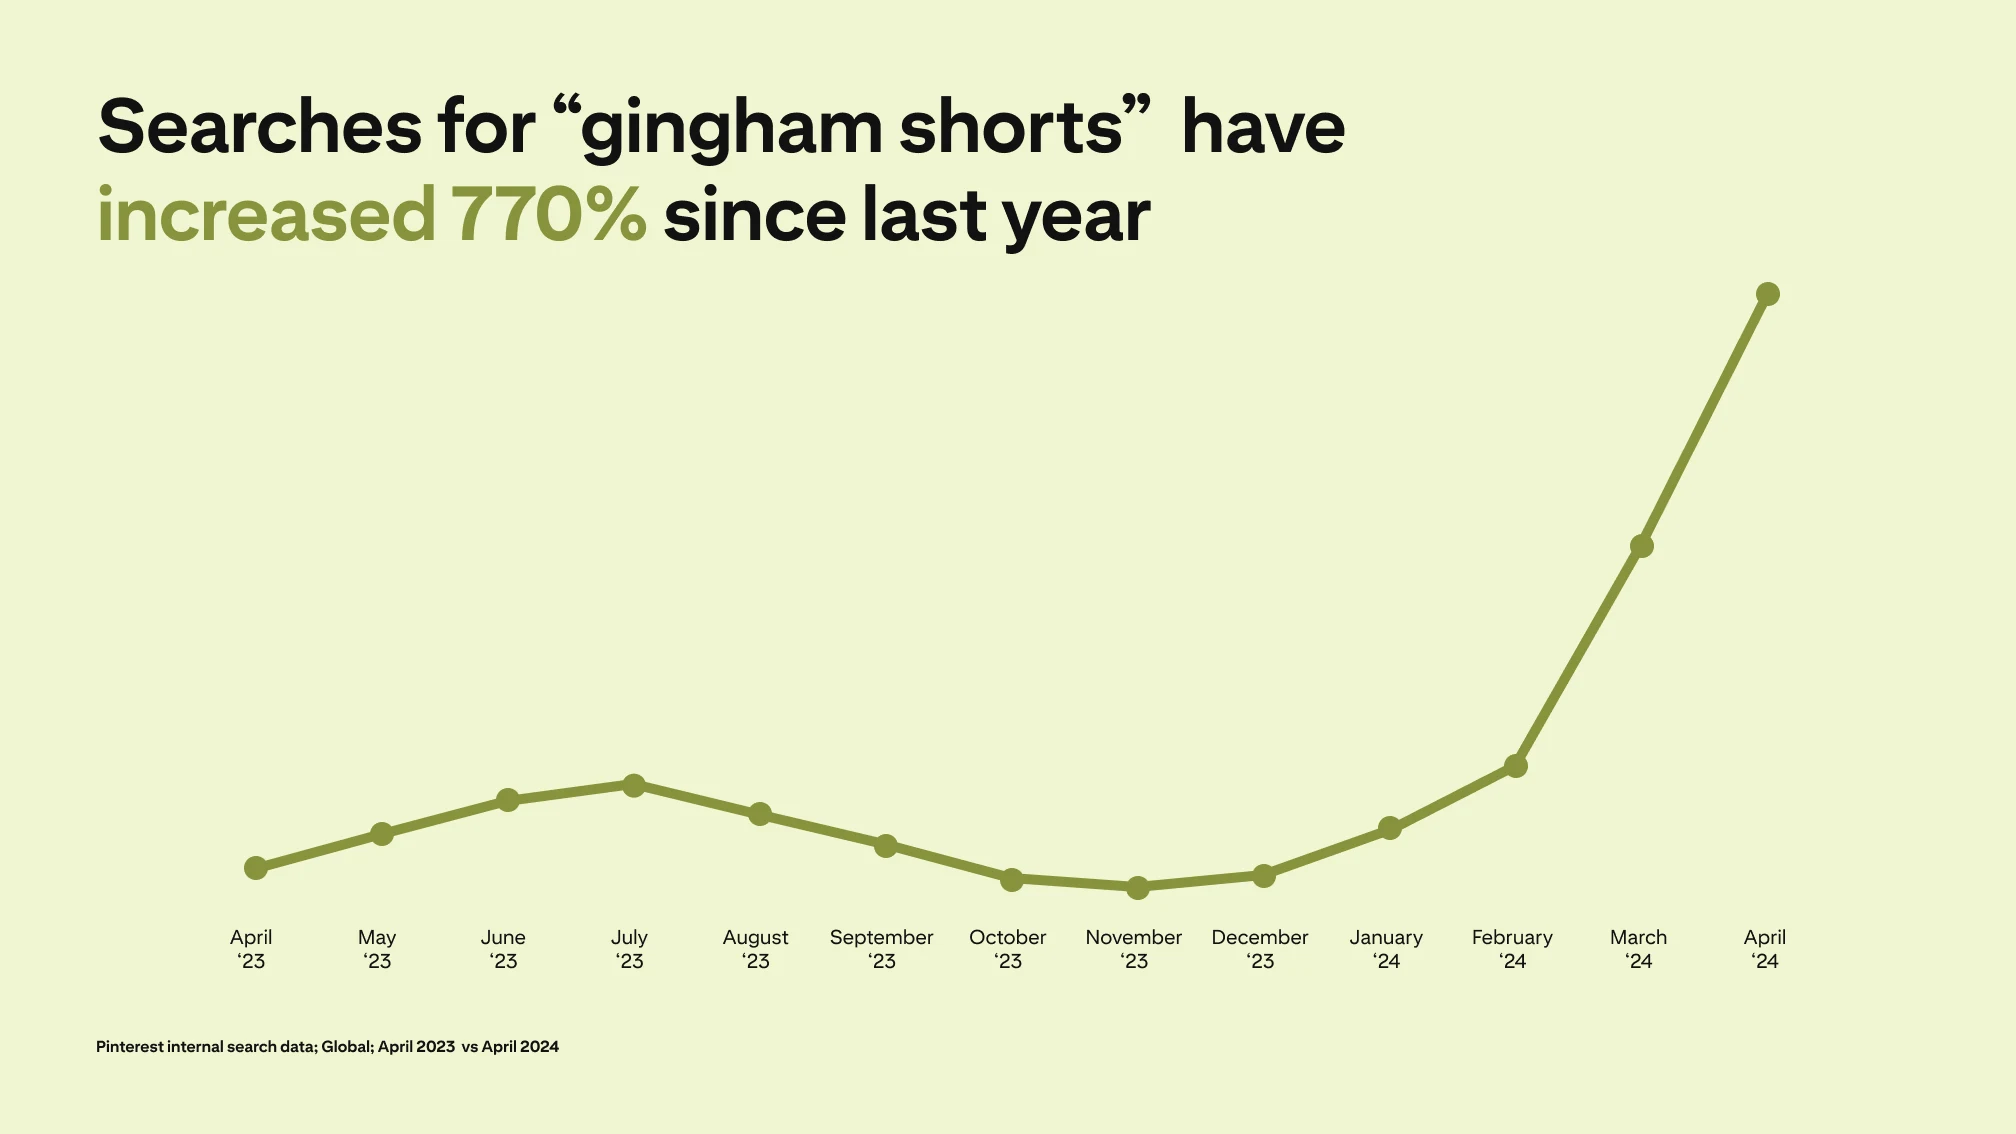 A line graph depicts searches for "gingham shorts" increasing 770% since last year